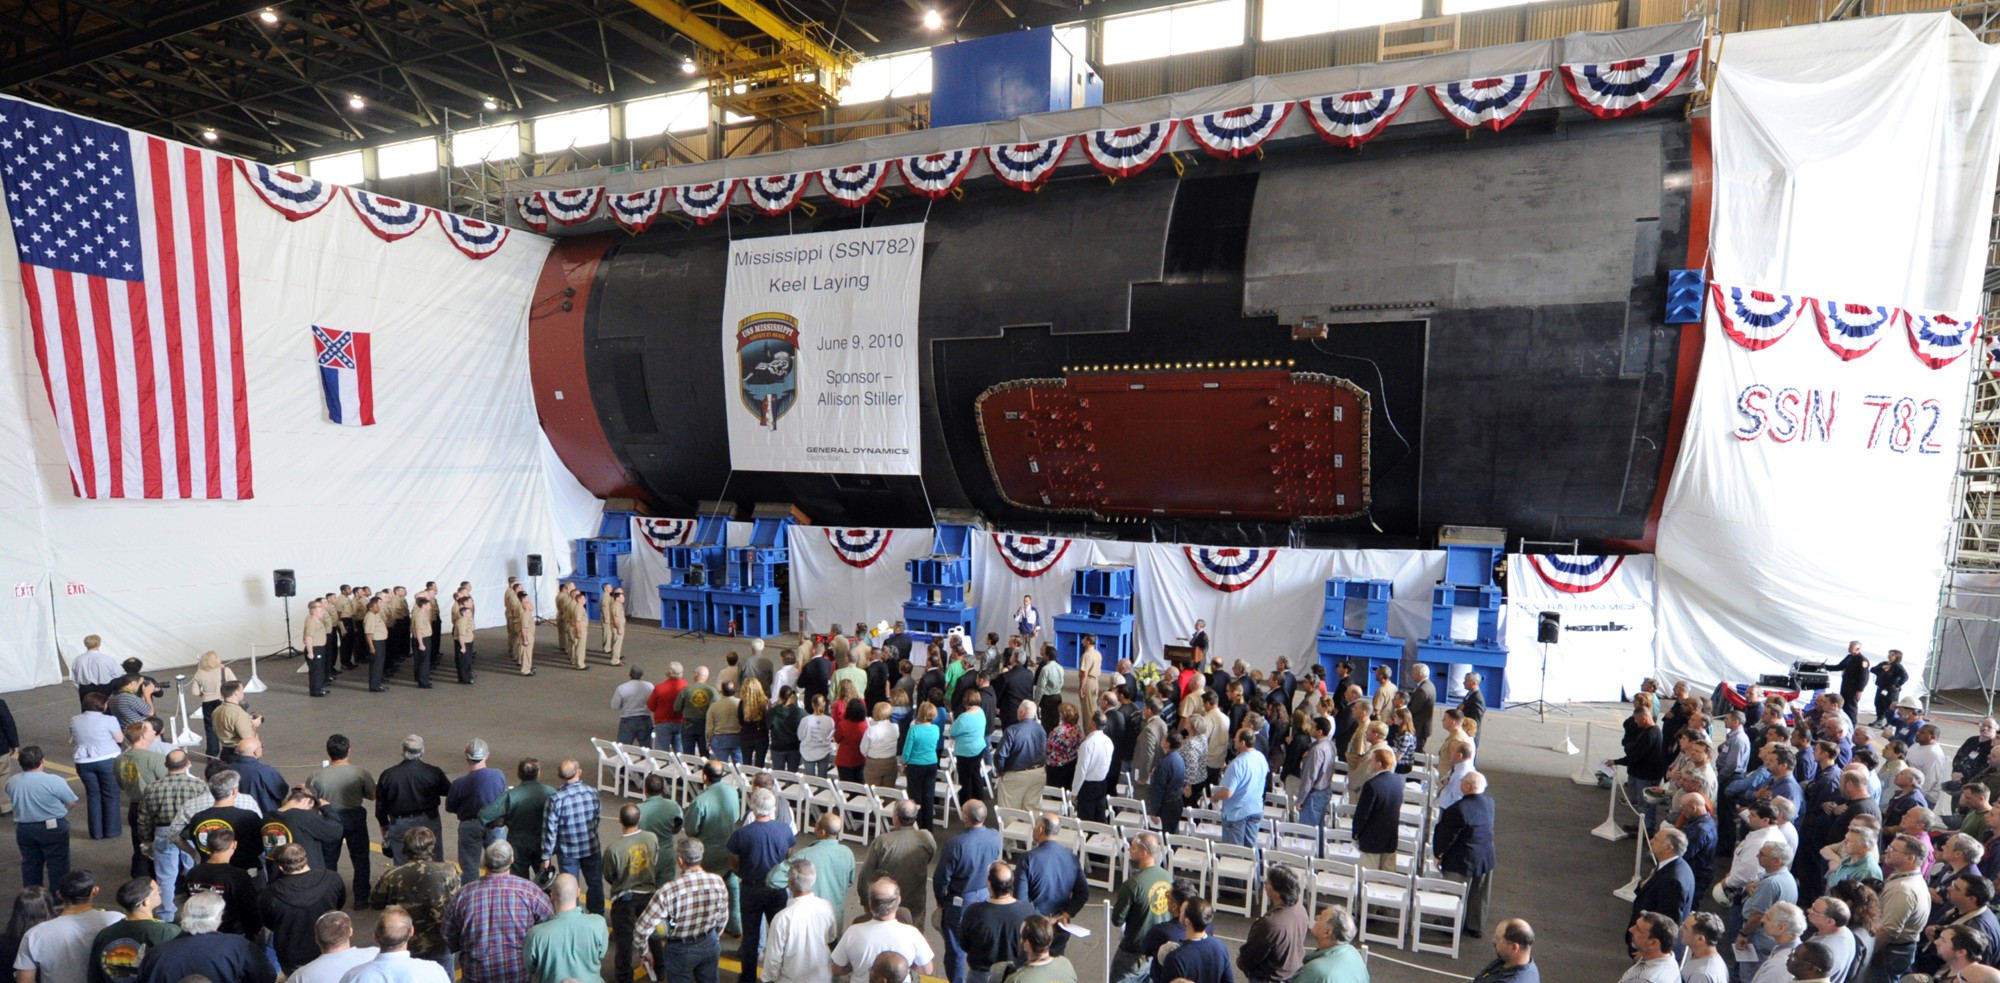 ssn-782 uss mississippi virginia class attack submarine us navy 31 keel laying ceremony gdeb quonset point rhode island